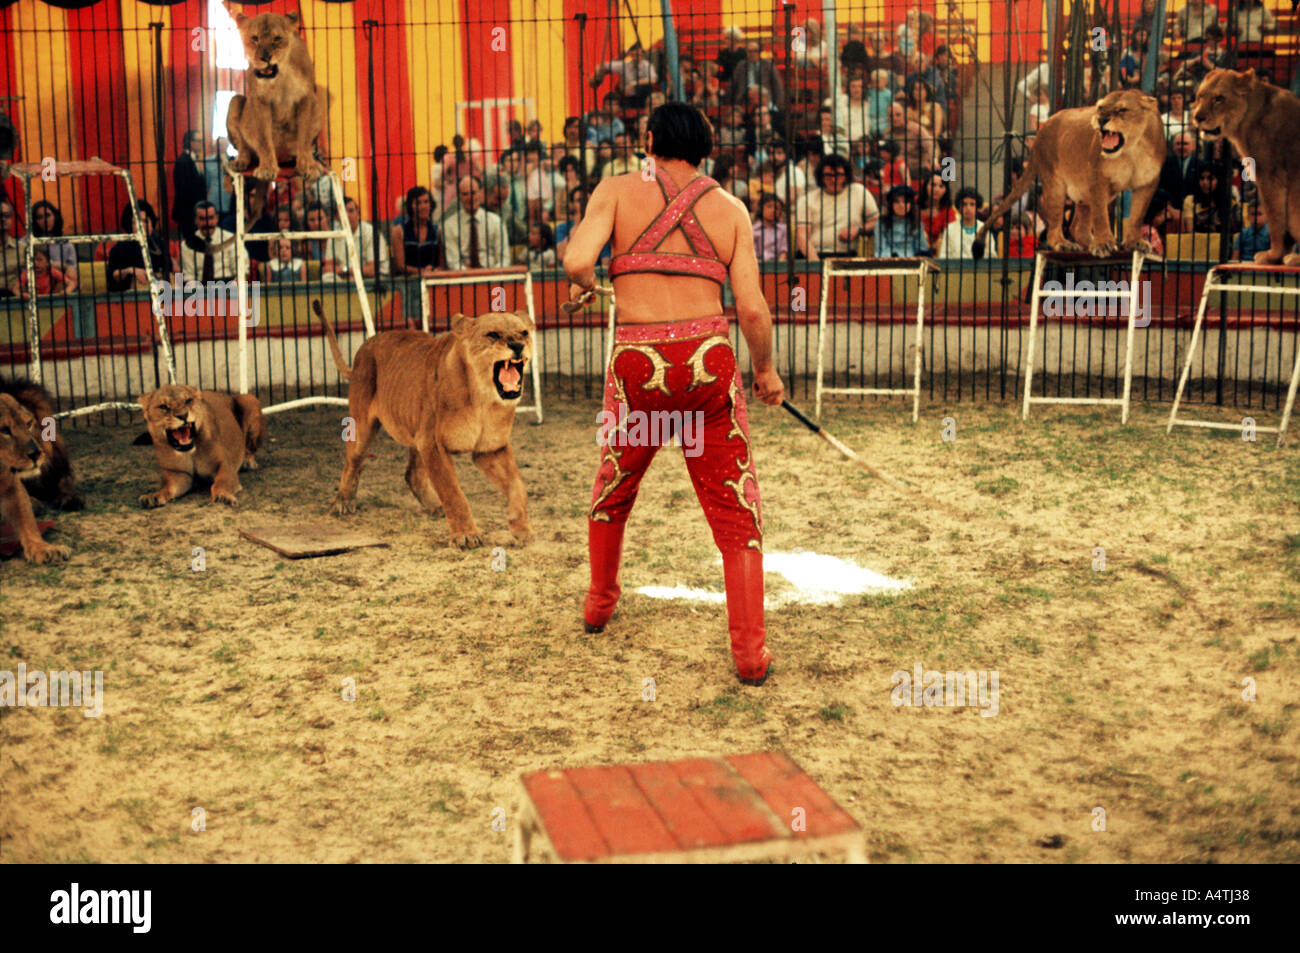 Lion tamer and lions in circus ring Stock Photo